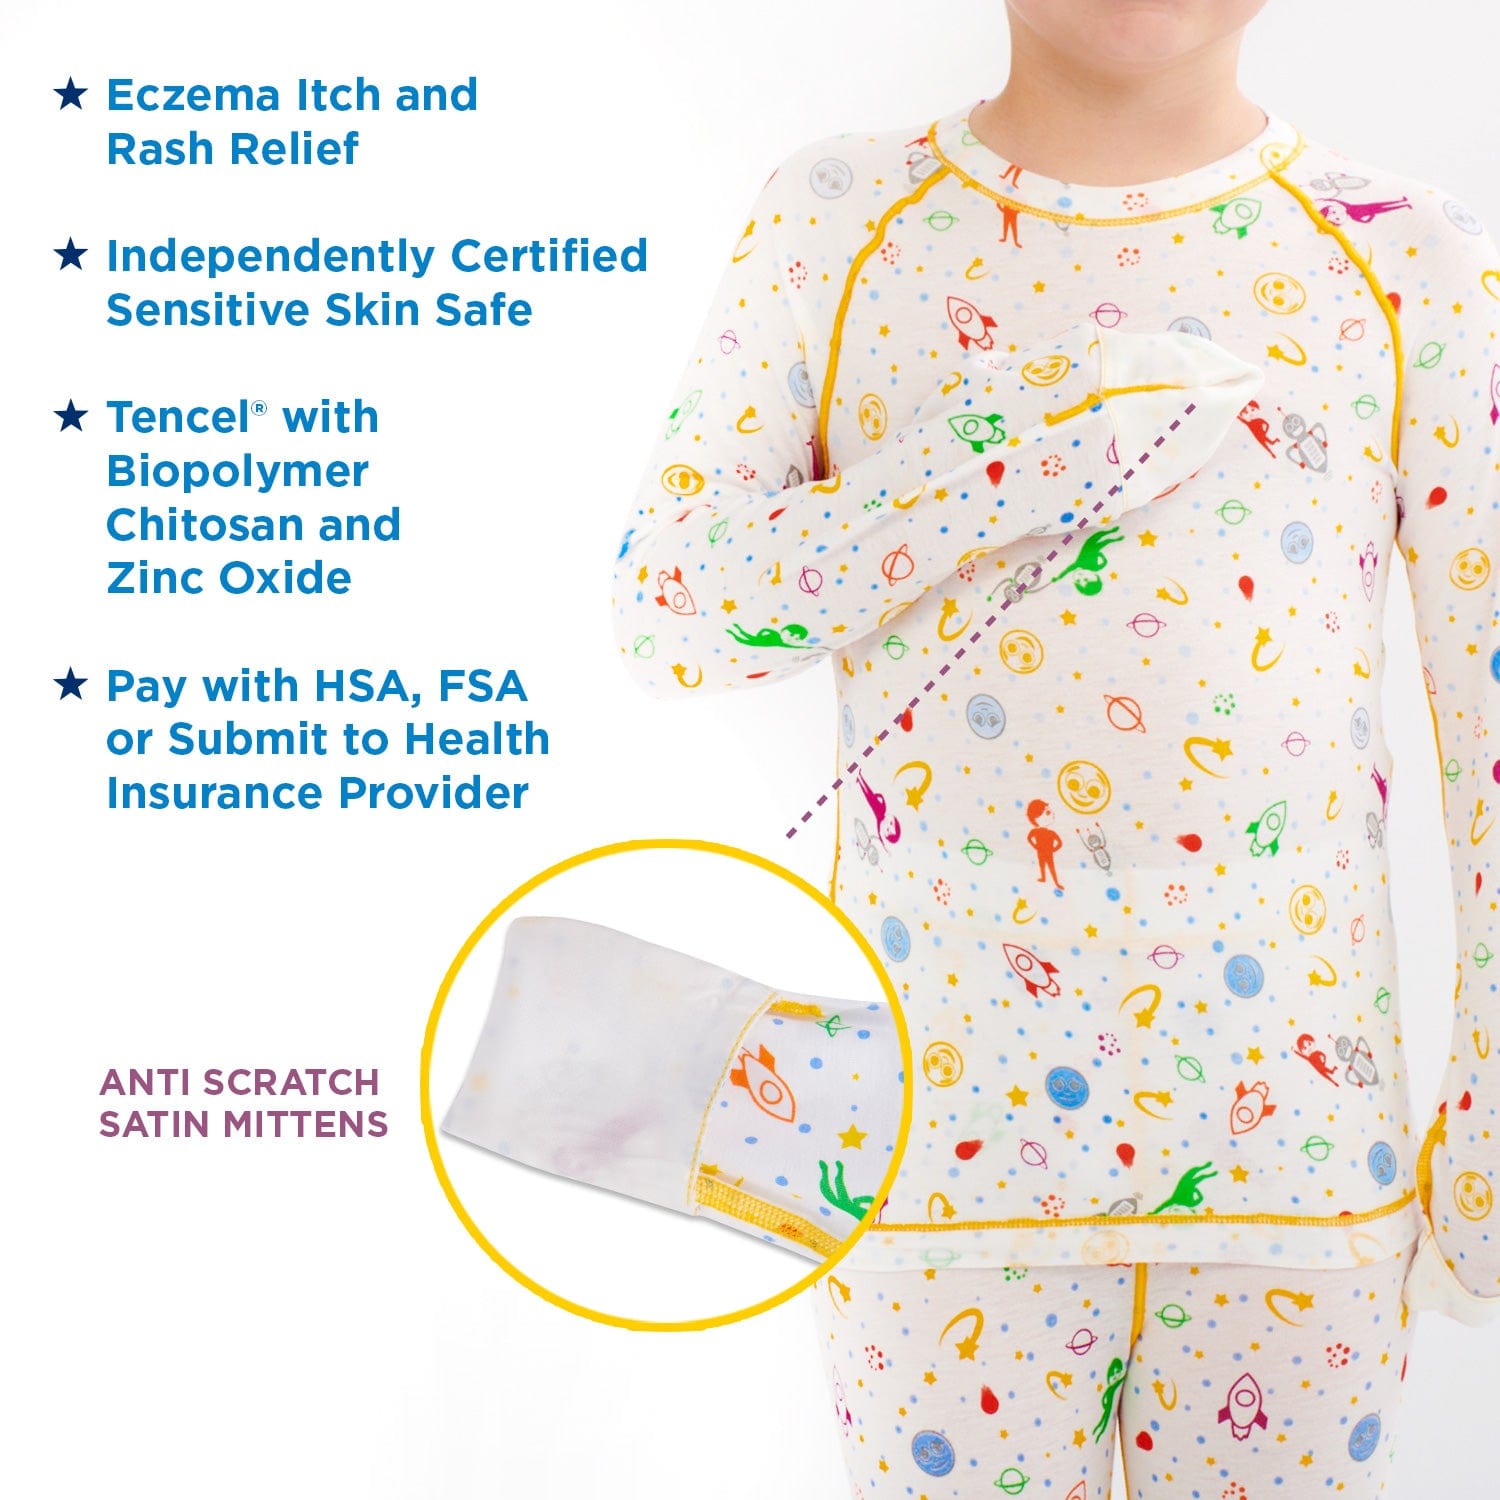 “Atopic Dermatitis Children Sleepwear and Clothing Stops Scratching from Eczema at Night”